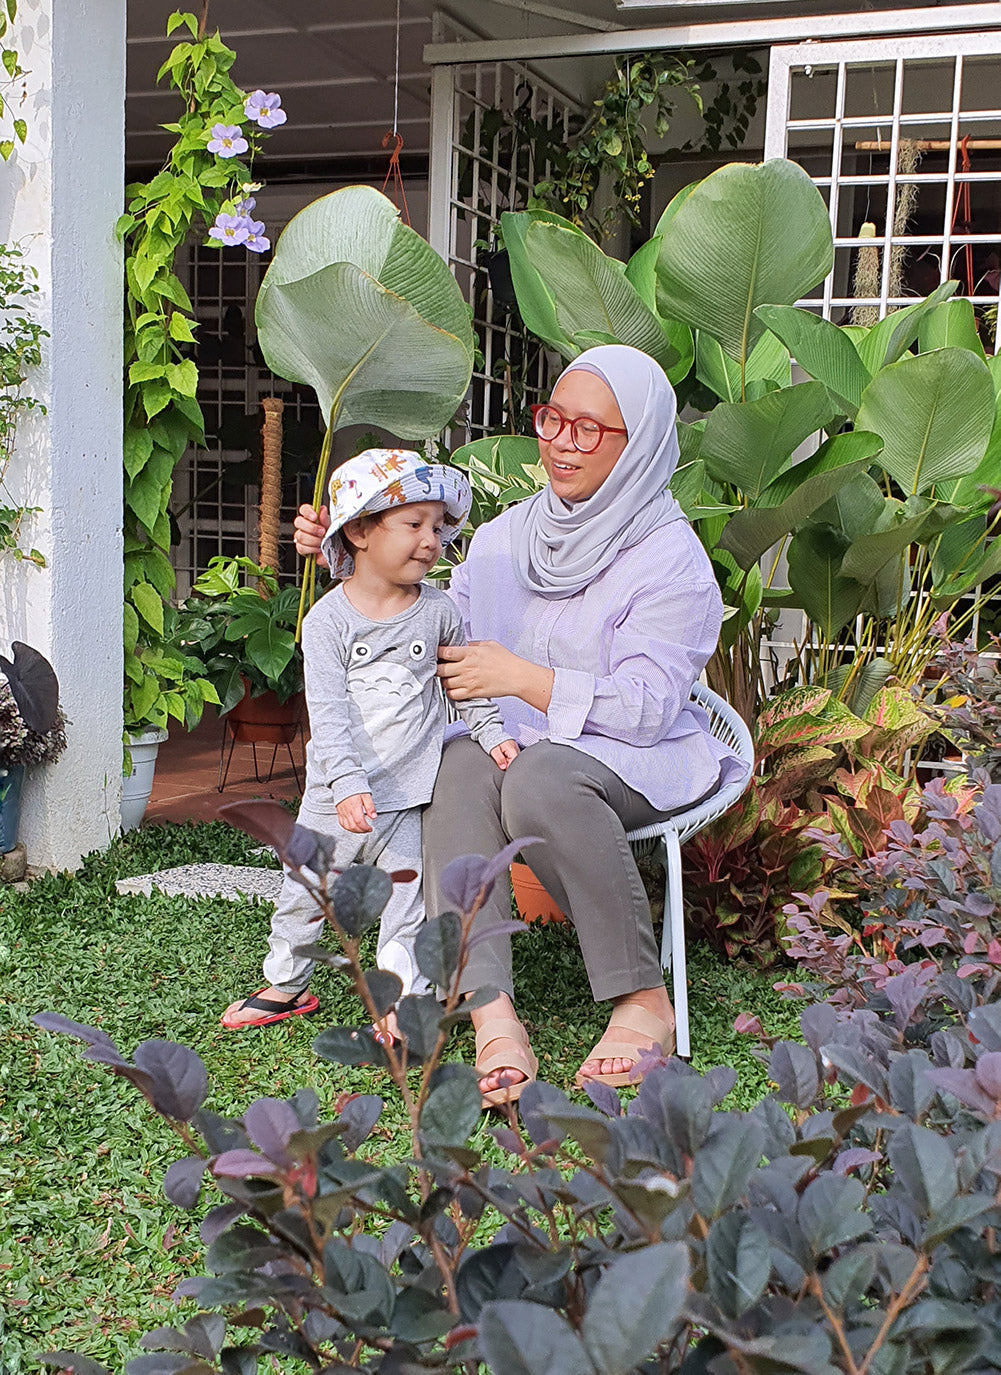 Get up close and personal with Aishah and her plant journey